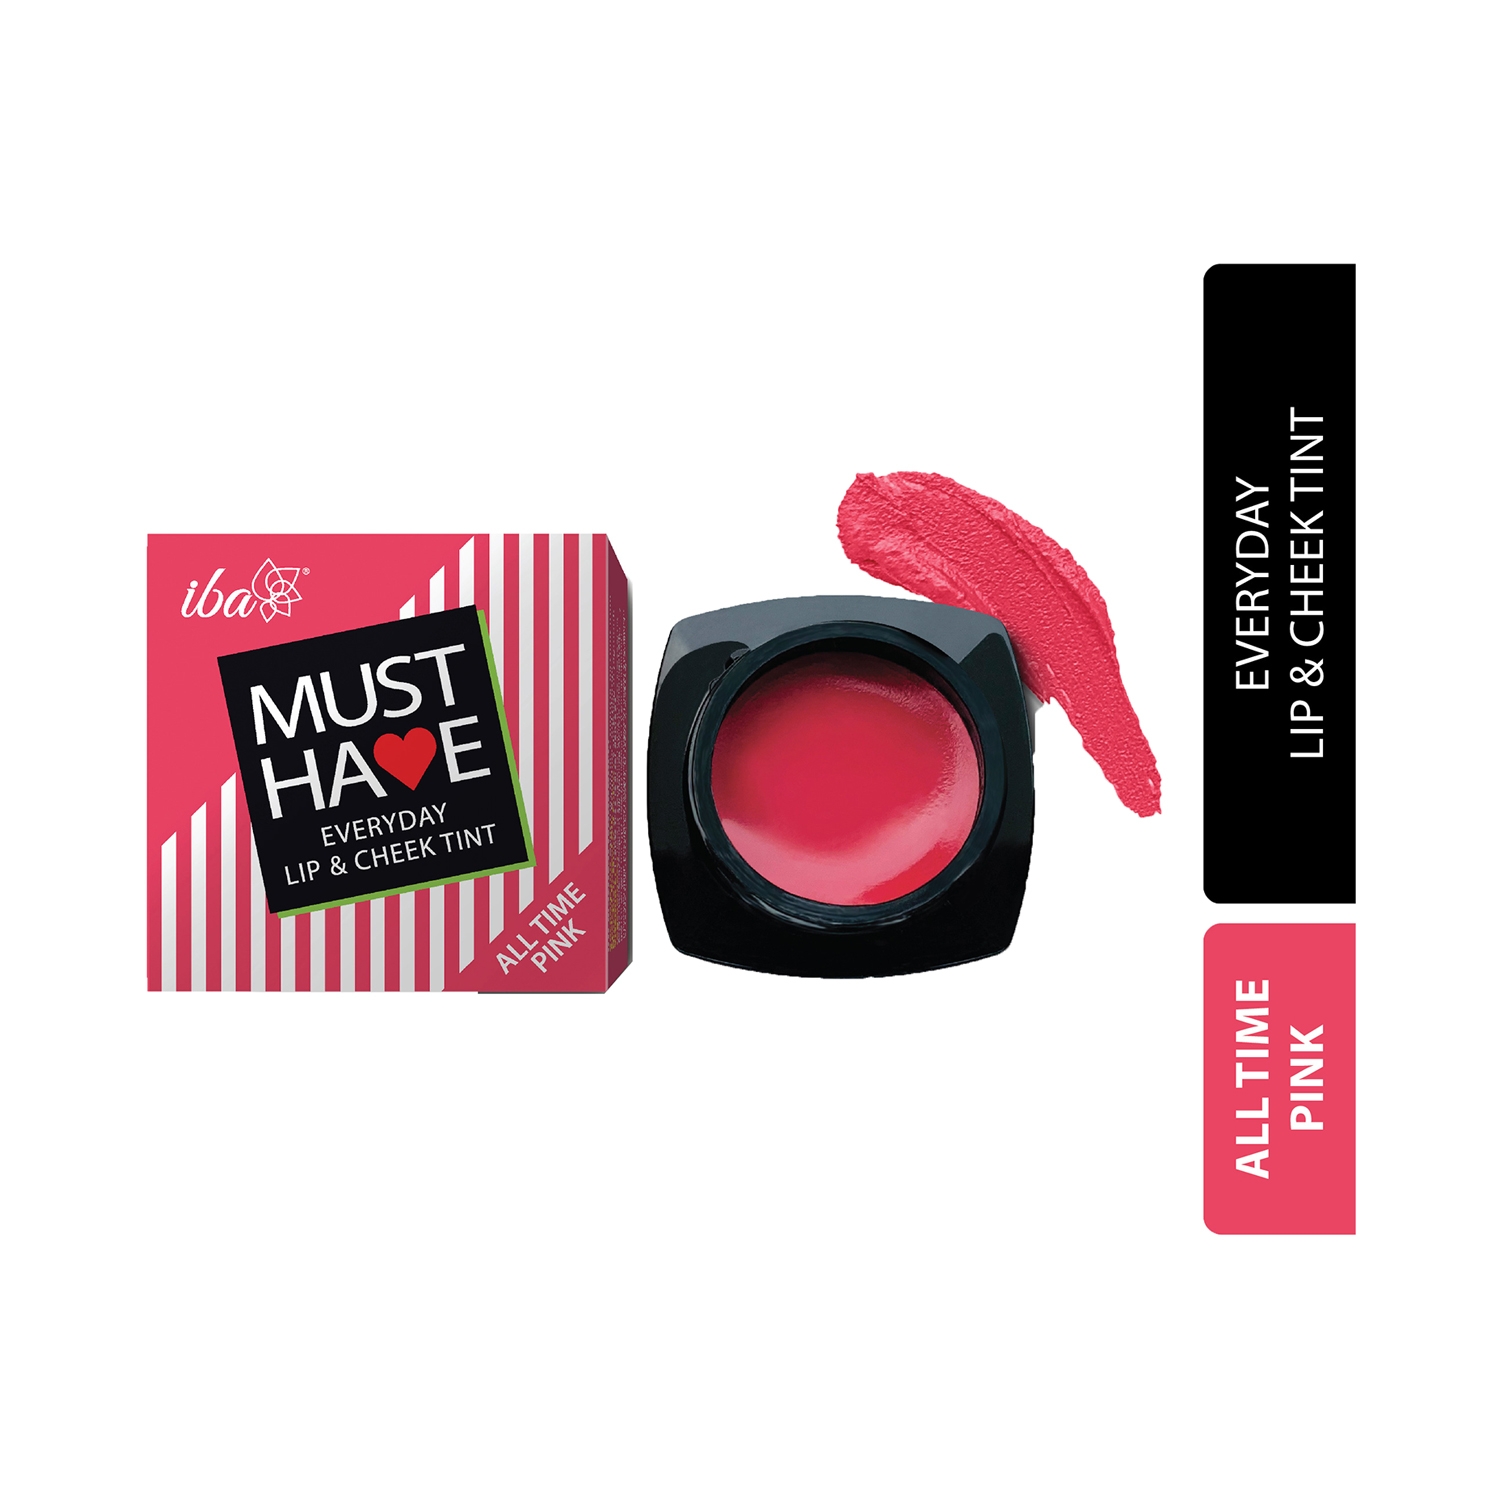 Iba | Iba Must Have Everyday Lip & Cheek Tint - All Time Pink (8g)